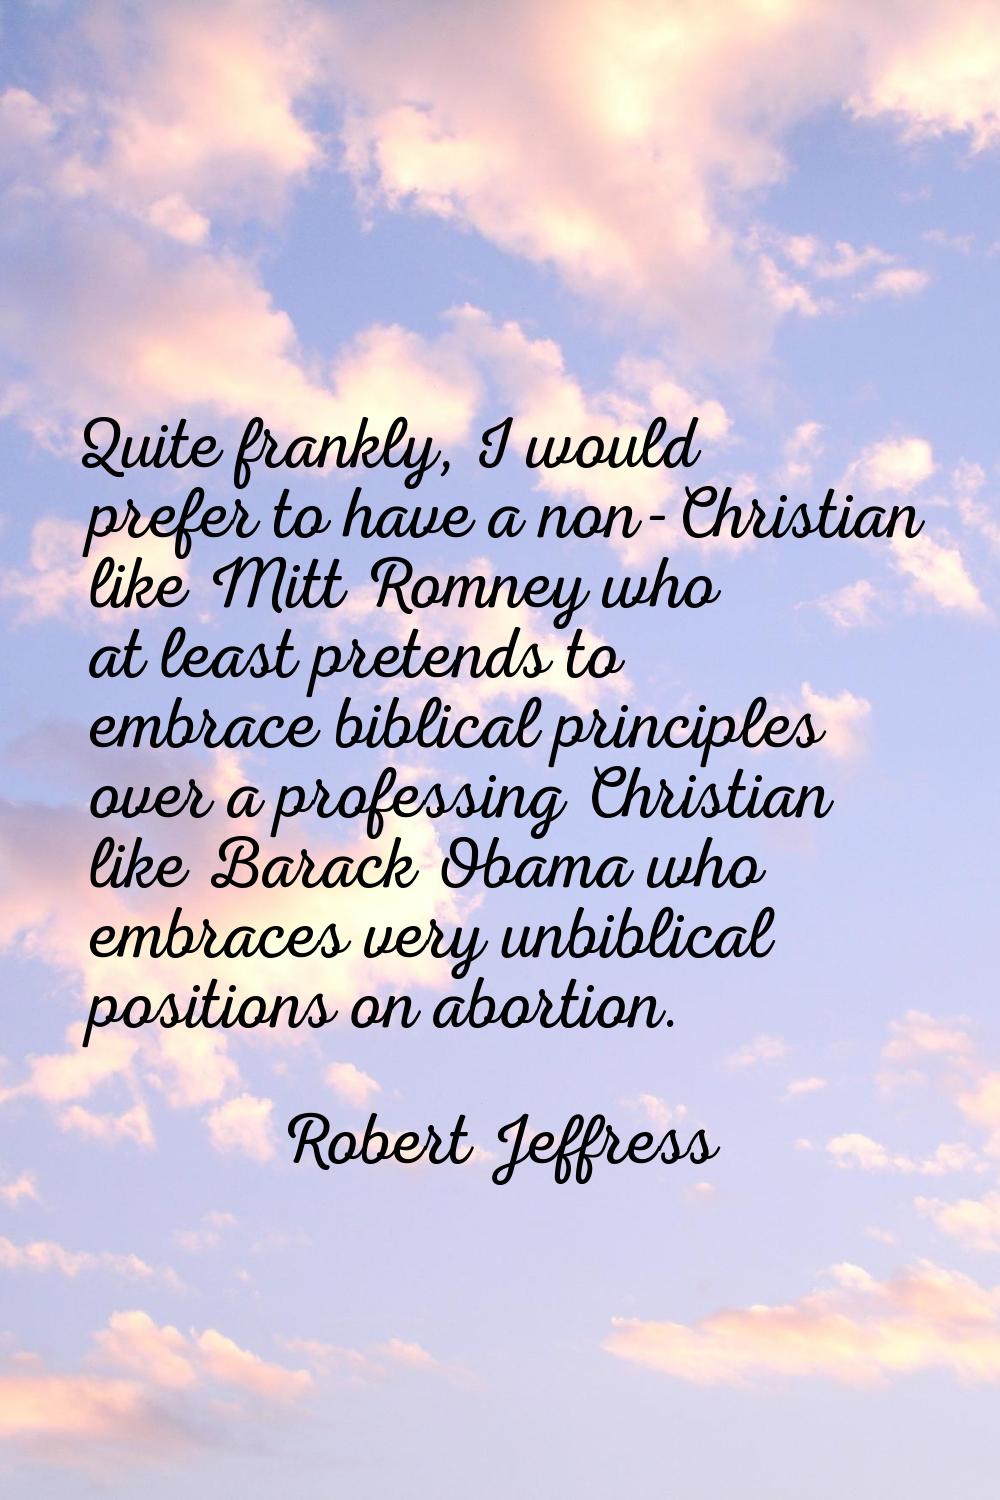 Quite frankly, I would prefer to have a non-Christian like Mitt Romney who at least pretends to emb